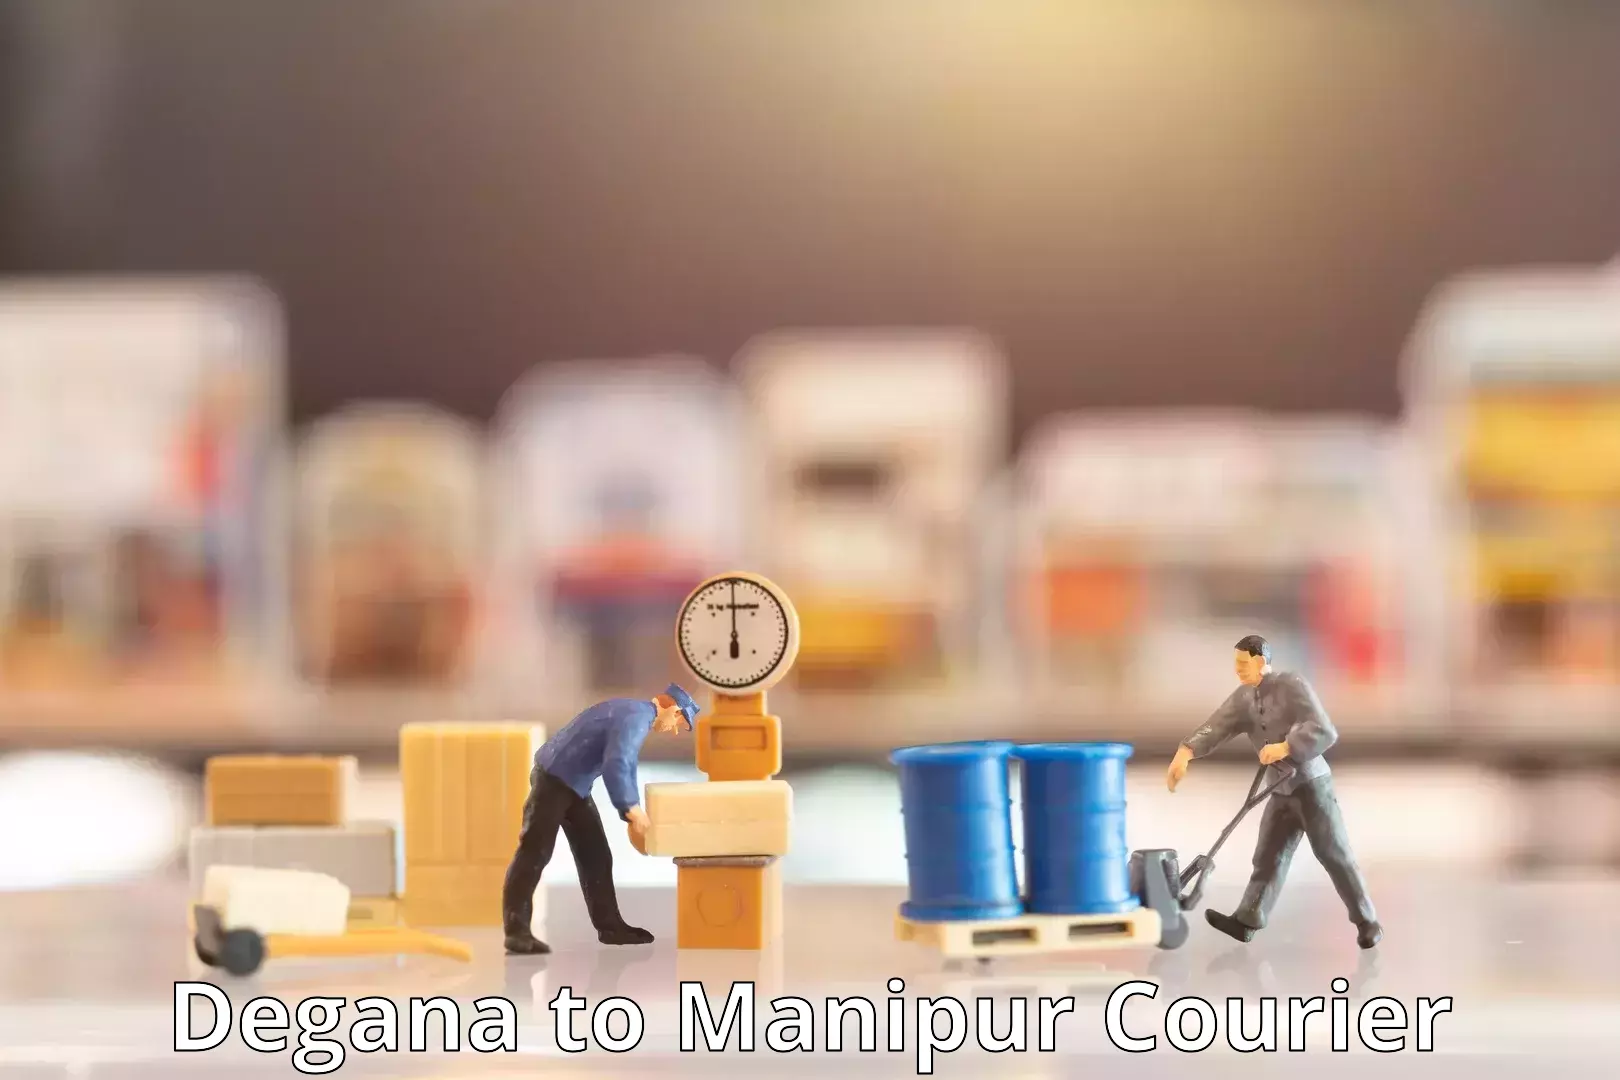 Smart shipping technology Degana to Manipur